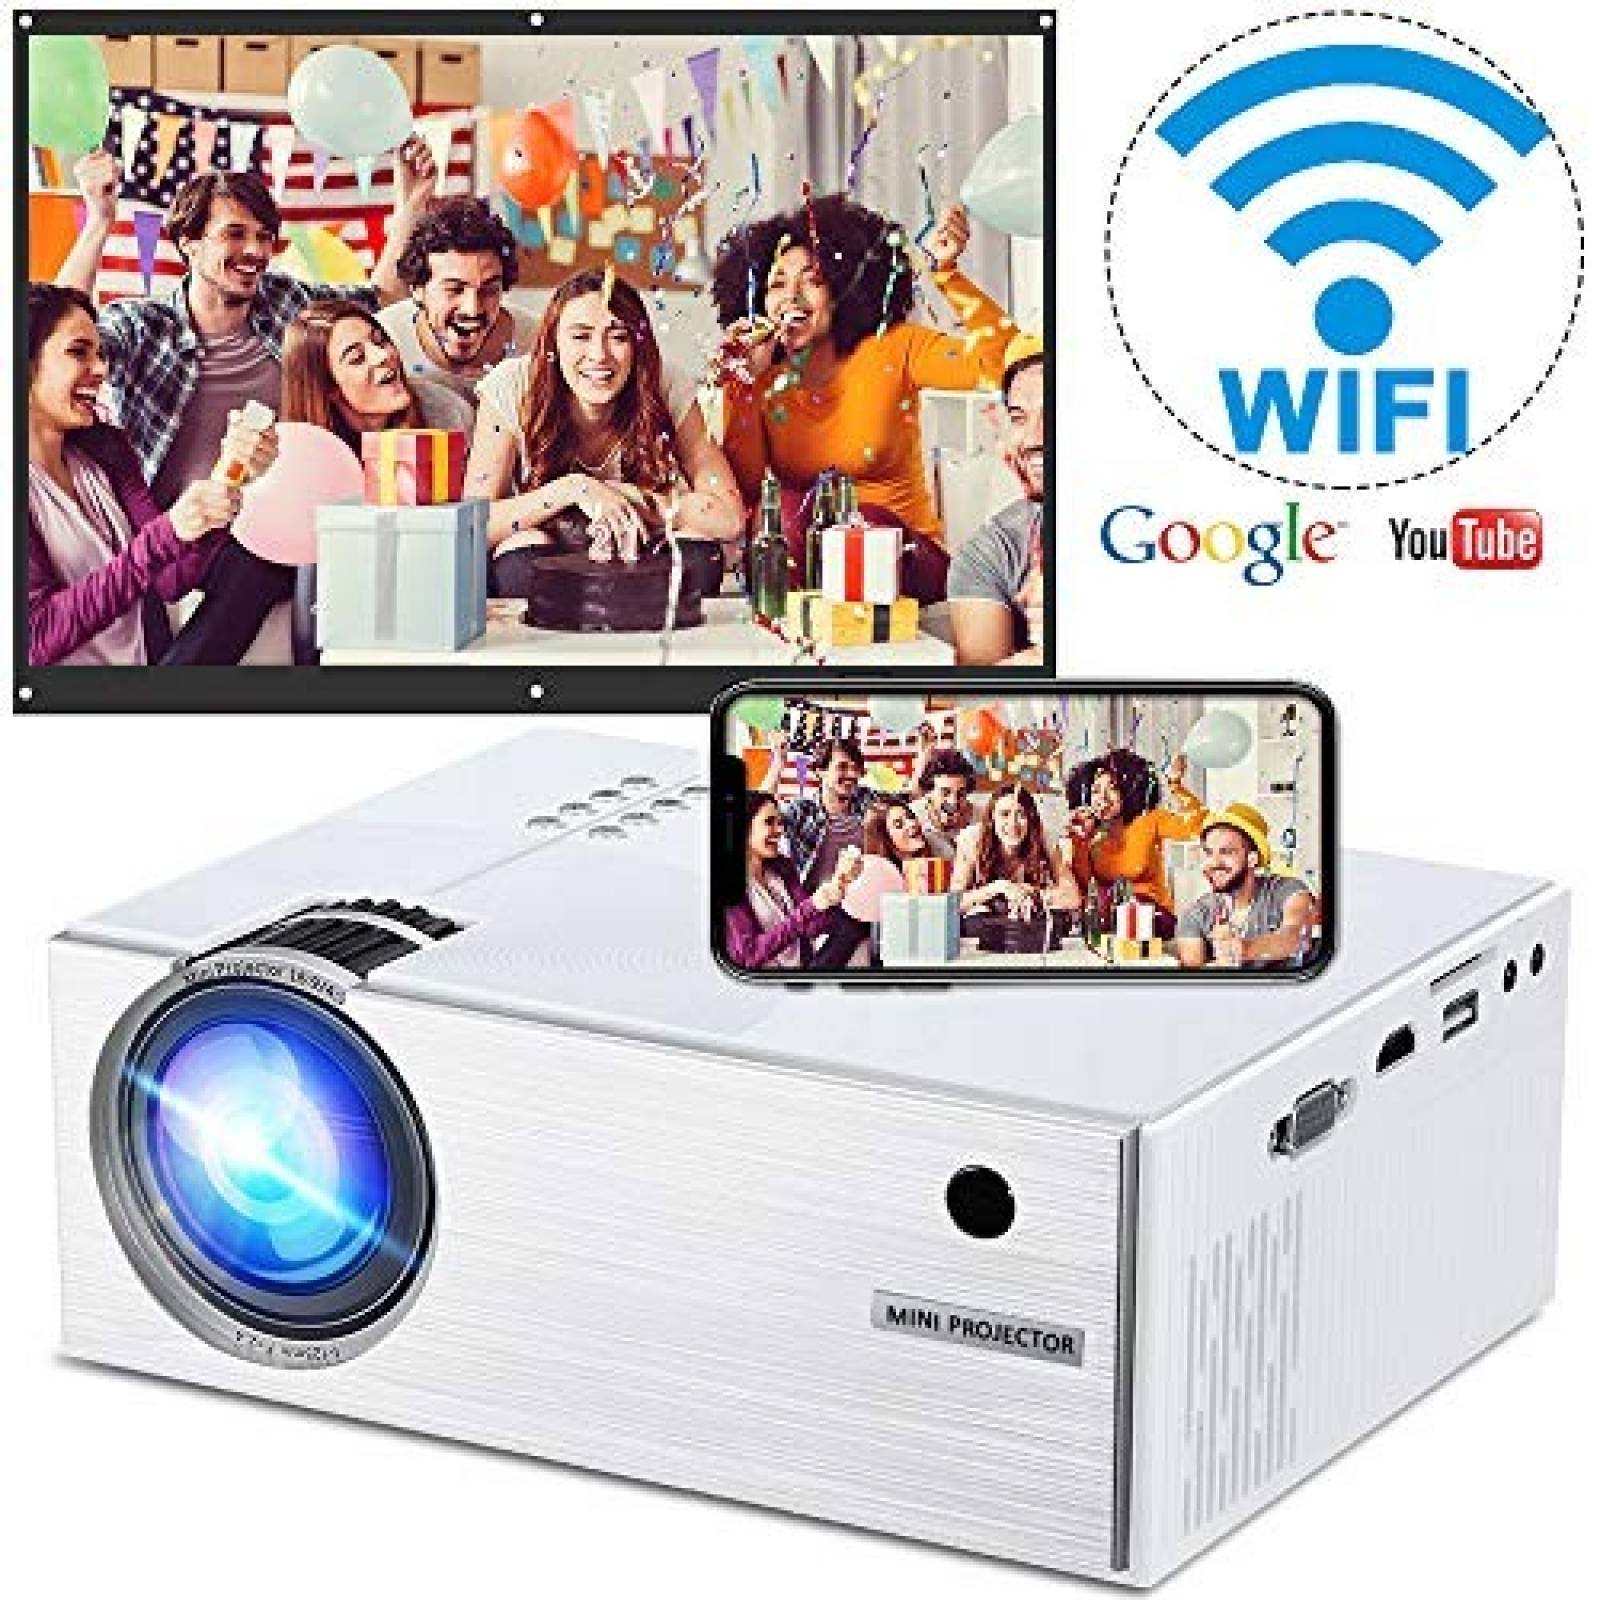 Proyector WEILIANTE inalámbrico WiFi LCD Full HD HDMI USB